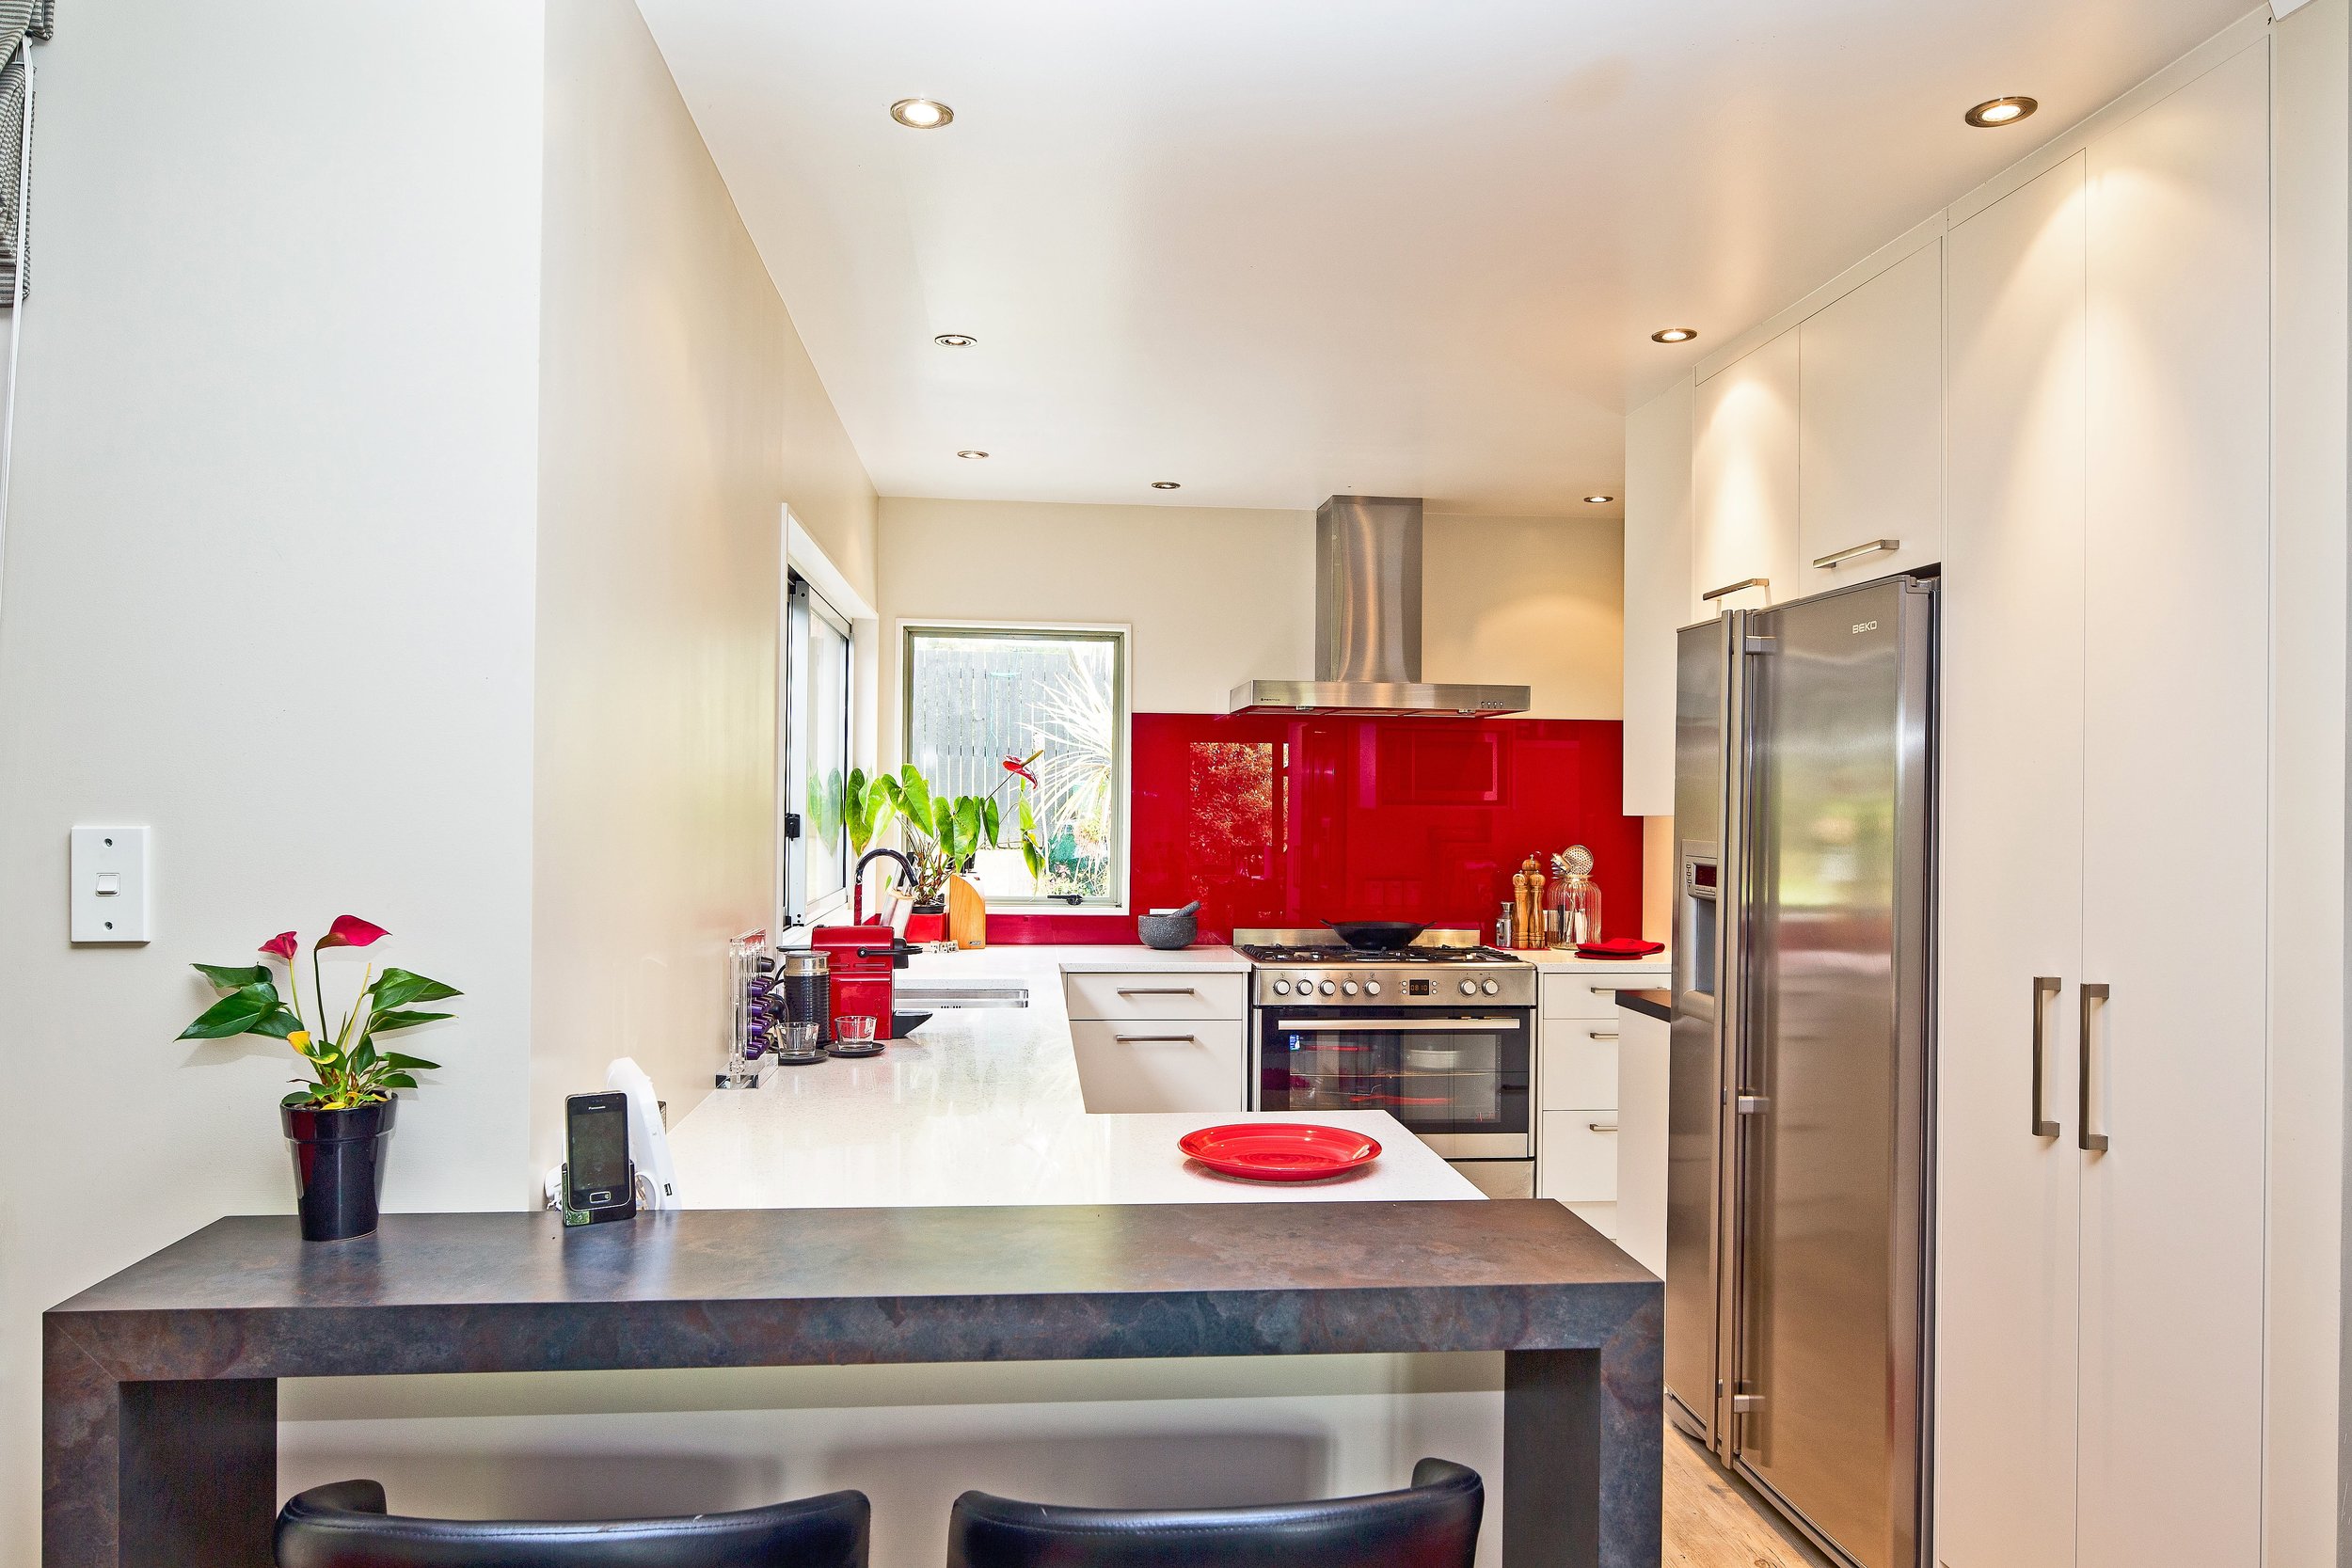 Galley style kitchen with red backpainted glass splashback adding pop of colour